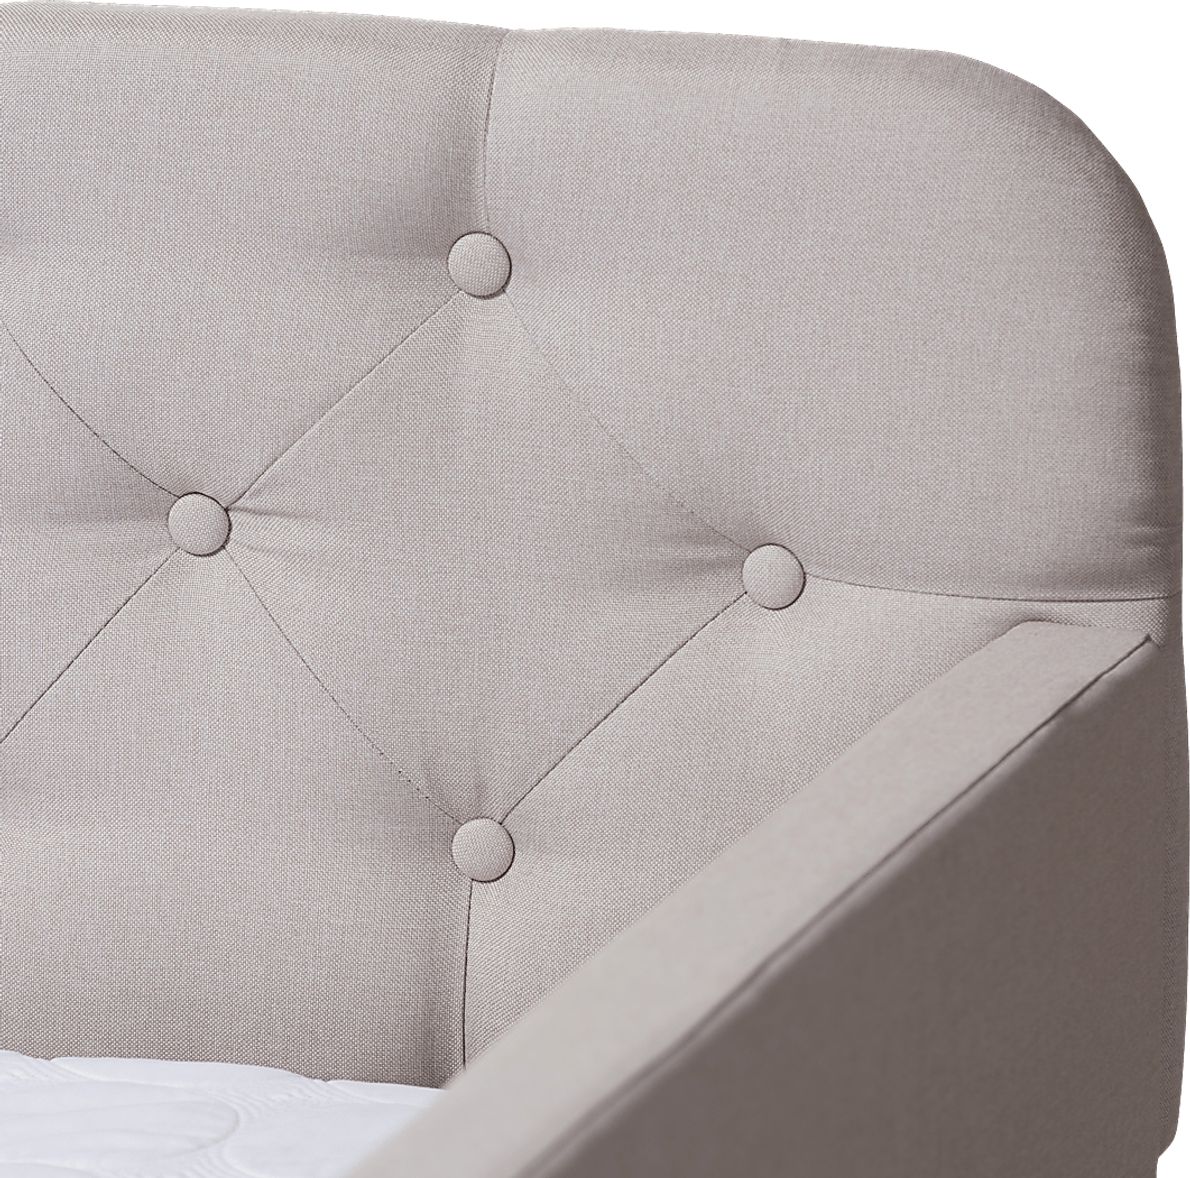 Milam Beige Twin Daybed With Trundle